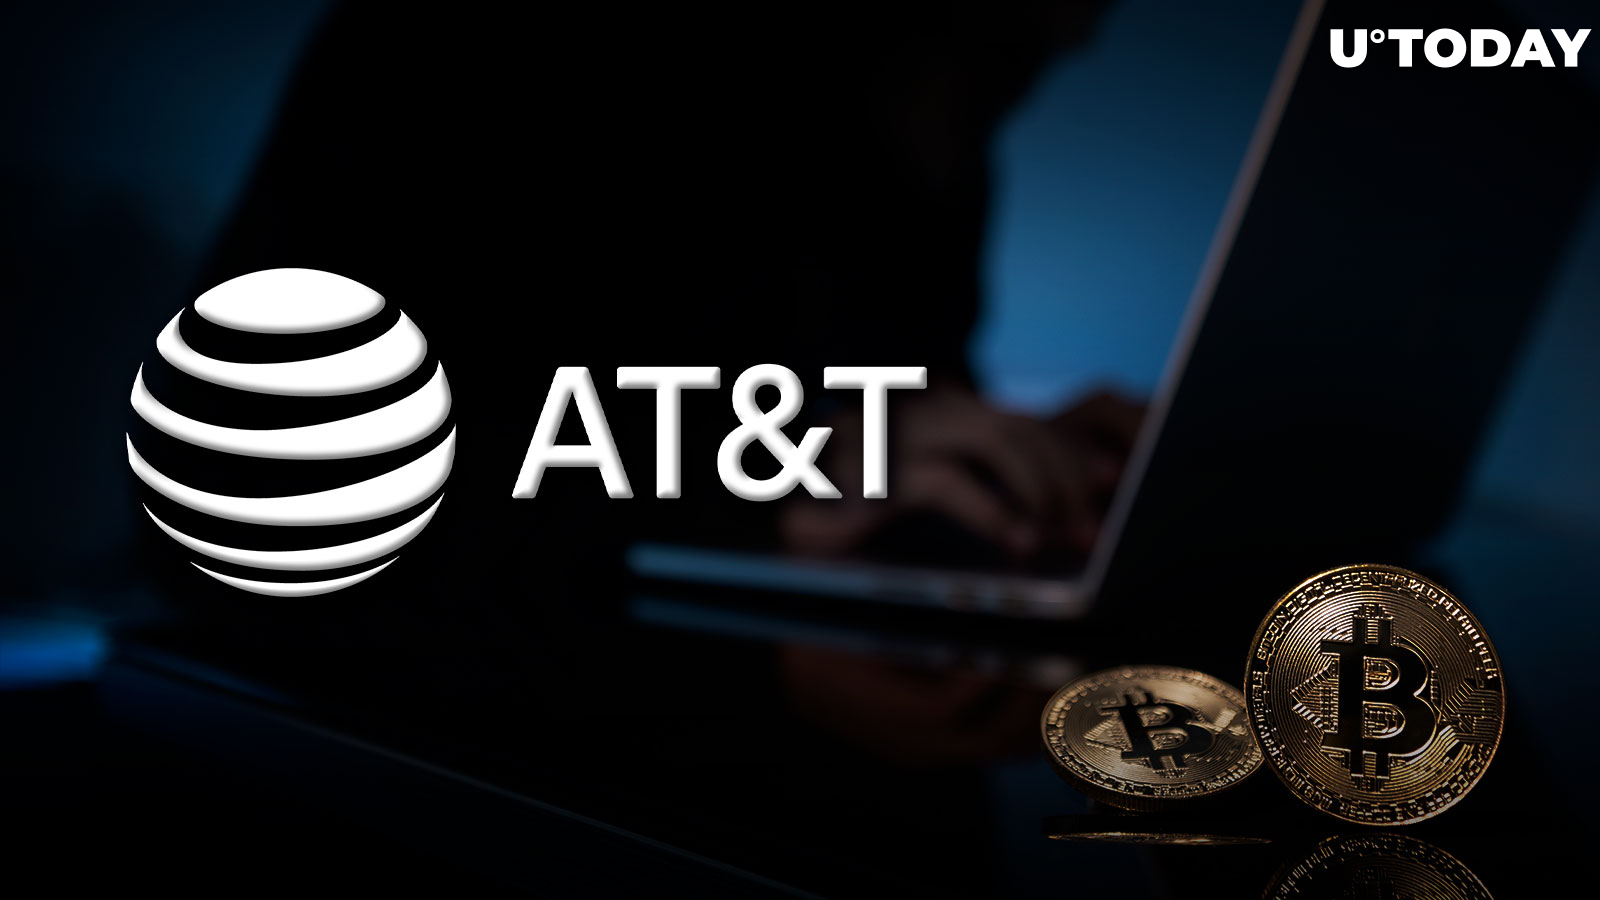 Crypto Crime Victim and Hacker Team Up to Take on AT&T